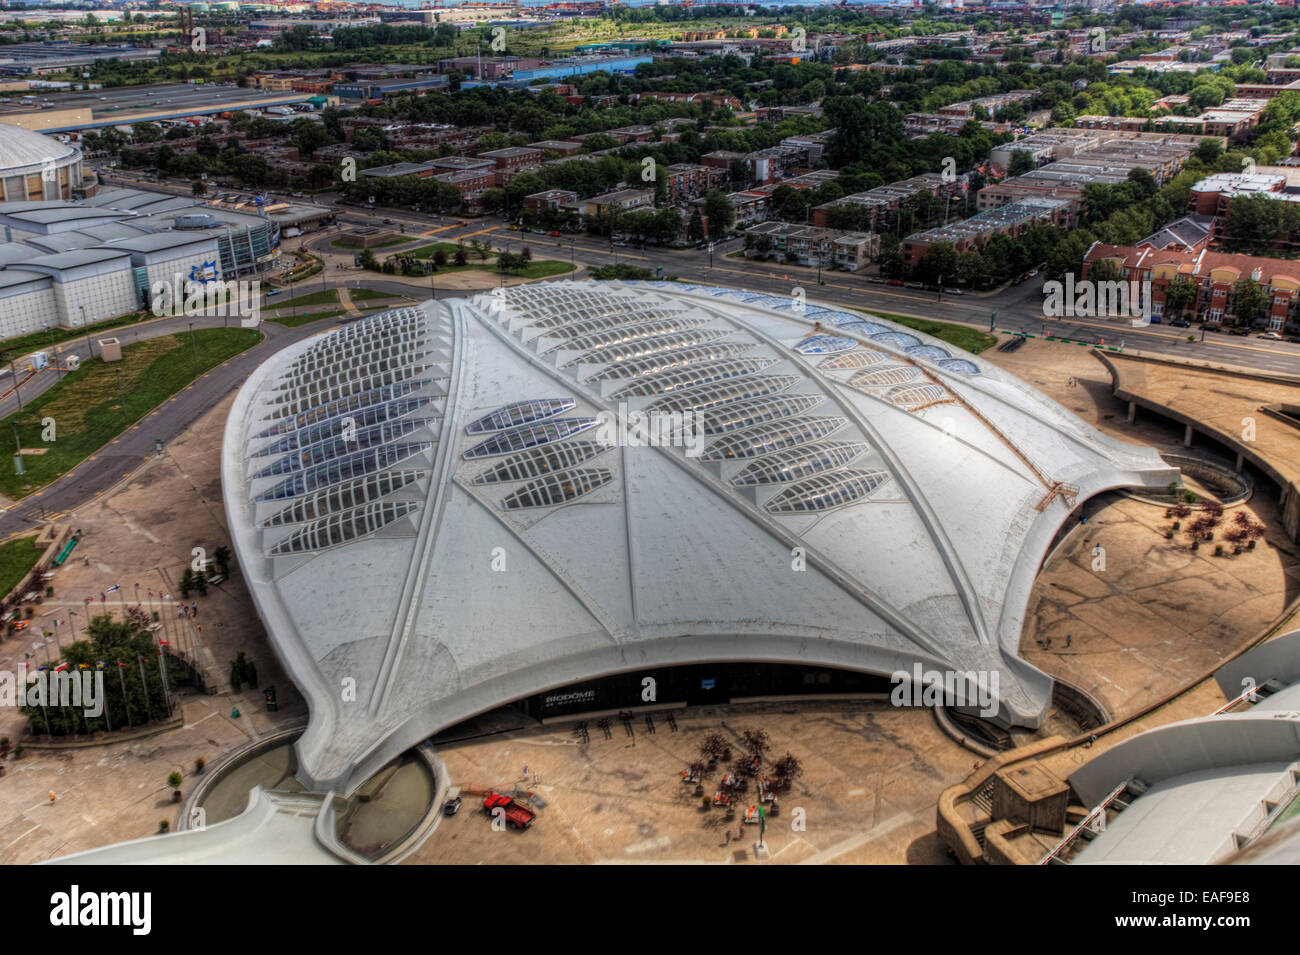 The biodome, an Olymic building found in Montreal, Canada Montreal, Canada Stock Photo